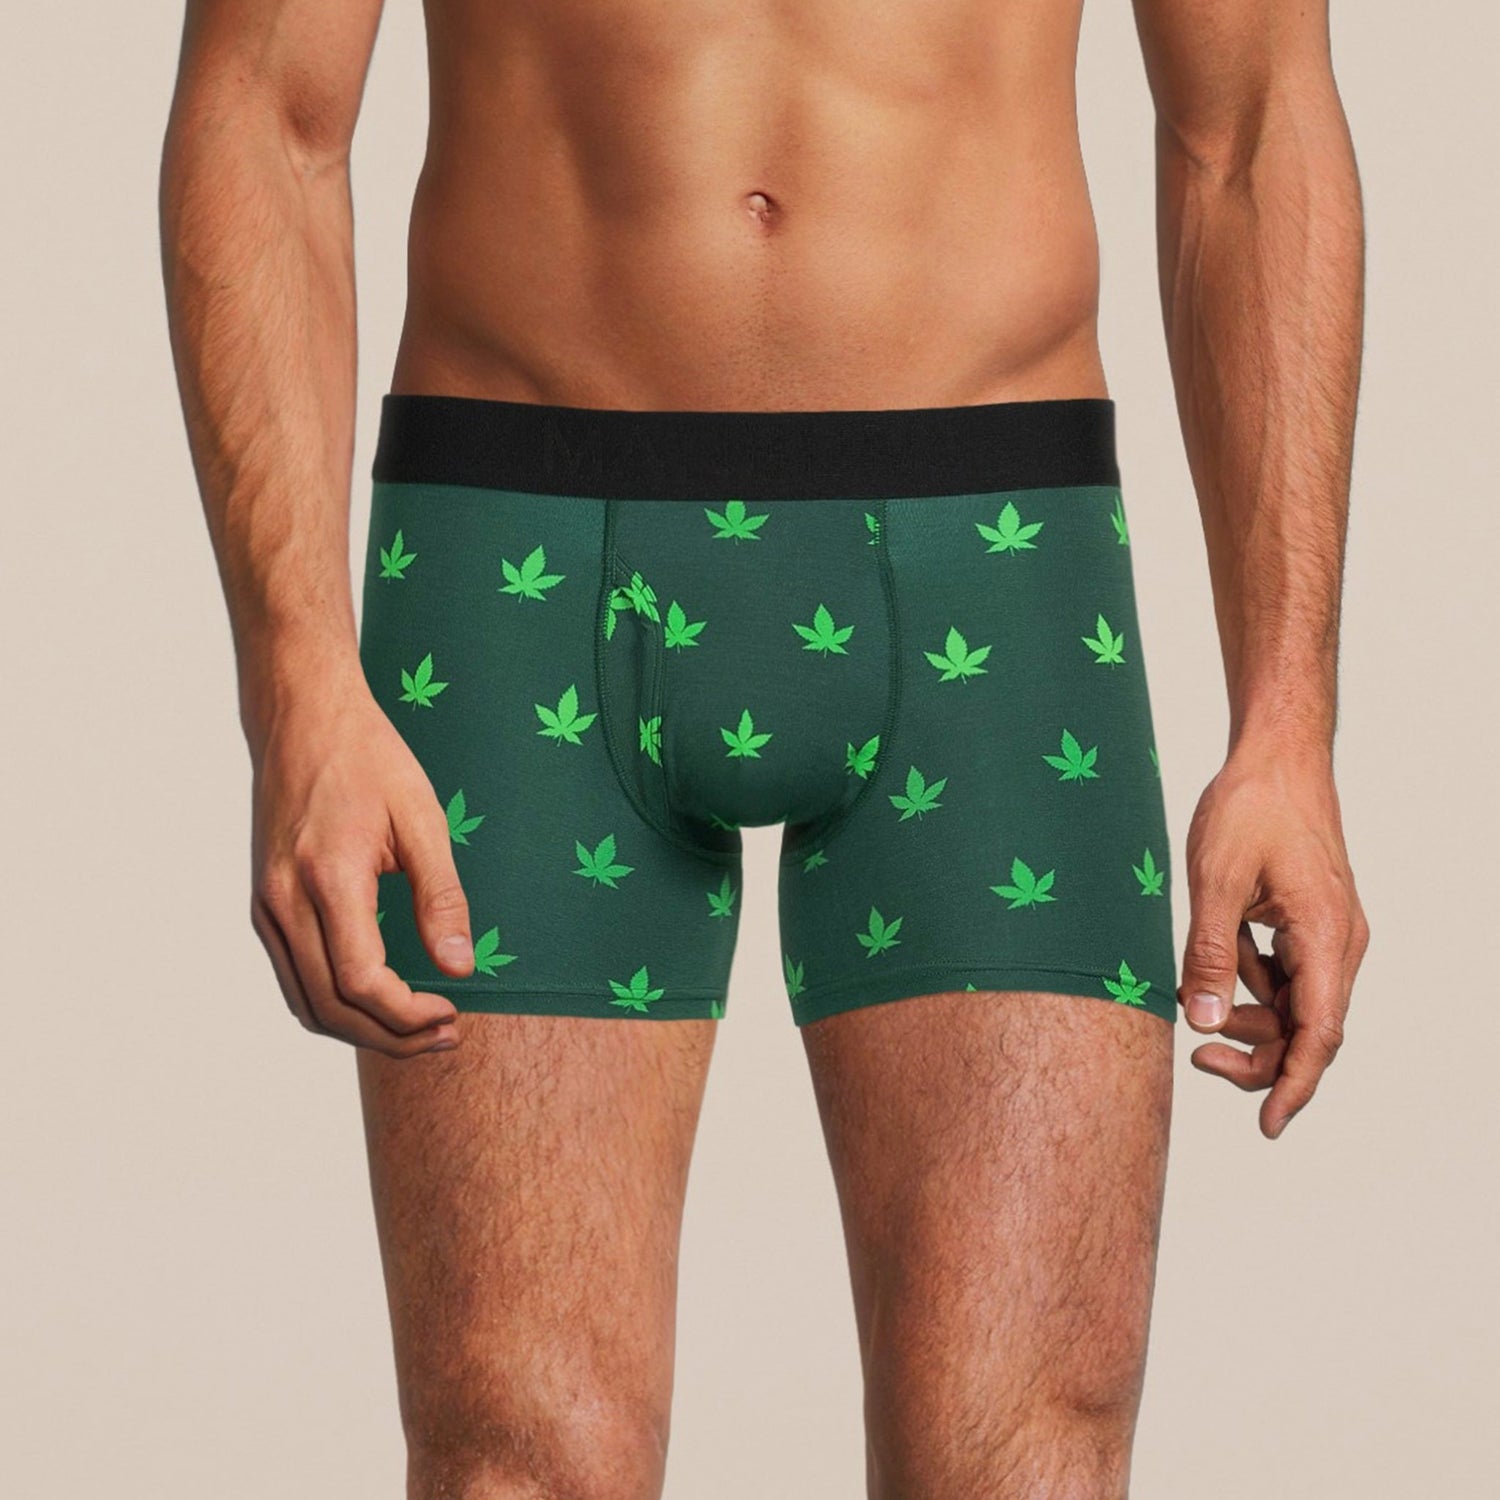 Men's 420 Cannabis Weed Boxer Trunks Underwear with Pouch – MANBUNS